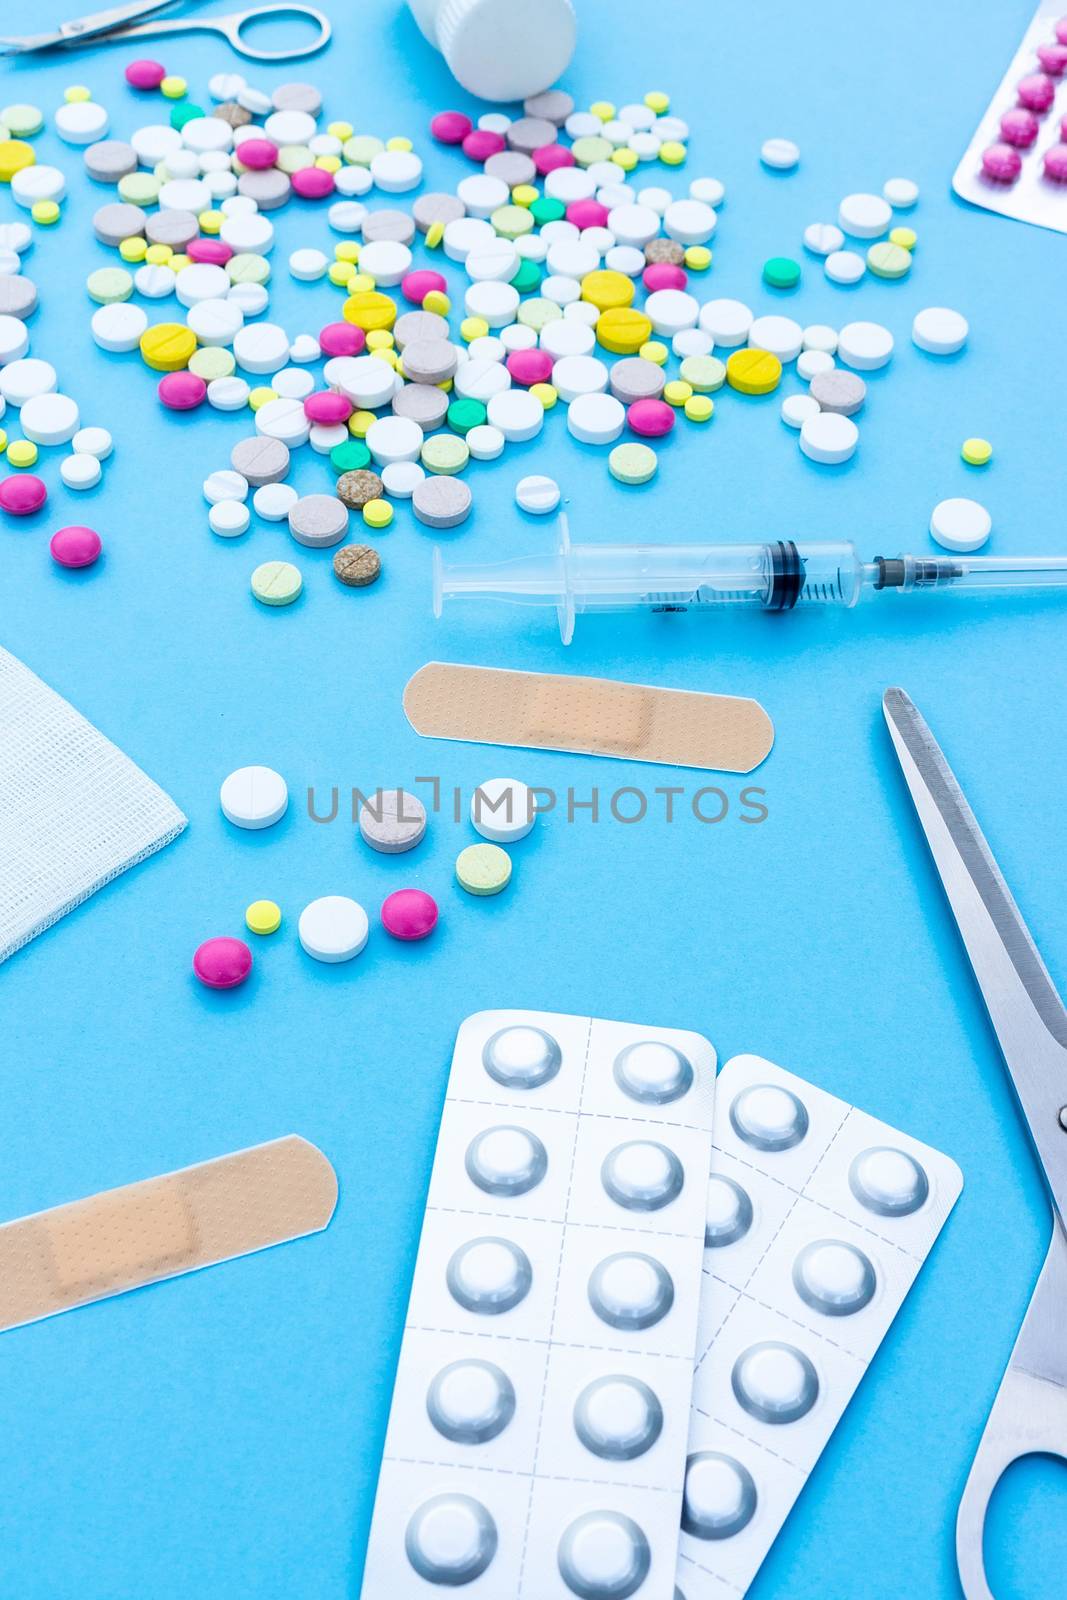 Assorted pharmaceutical medicine pills, tablets and capsules over blue background